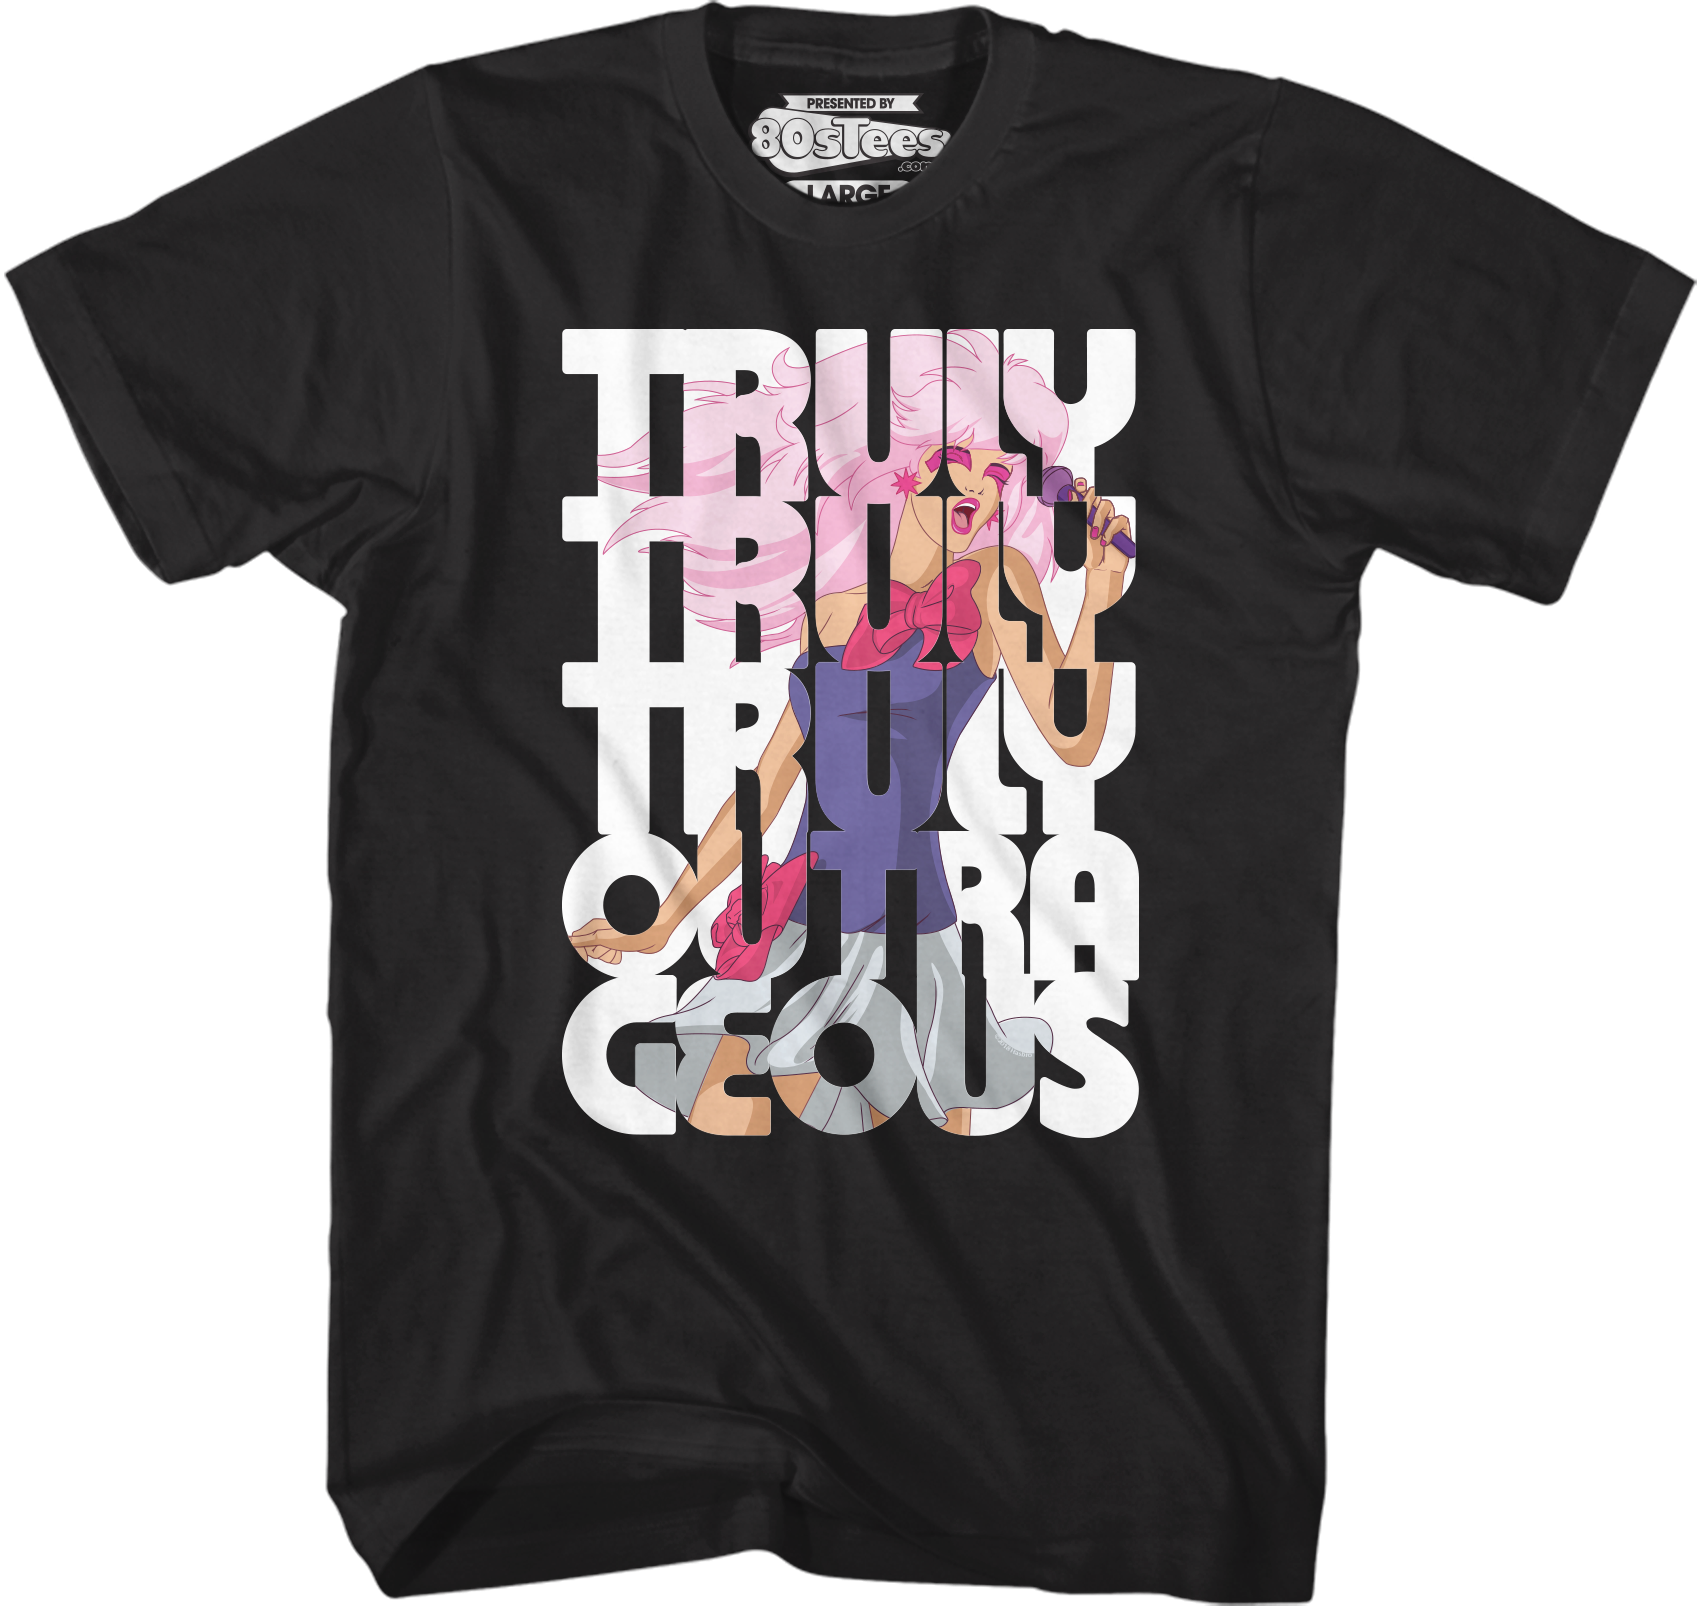 Truly Outrageous Jem T-Shirt